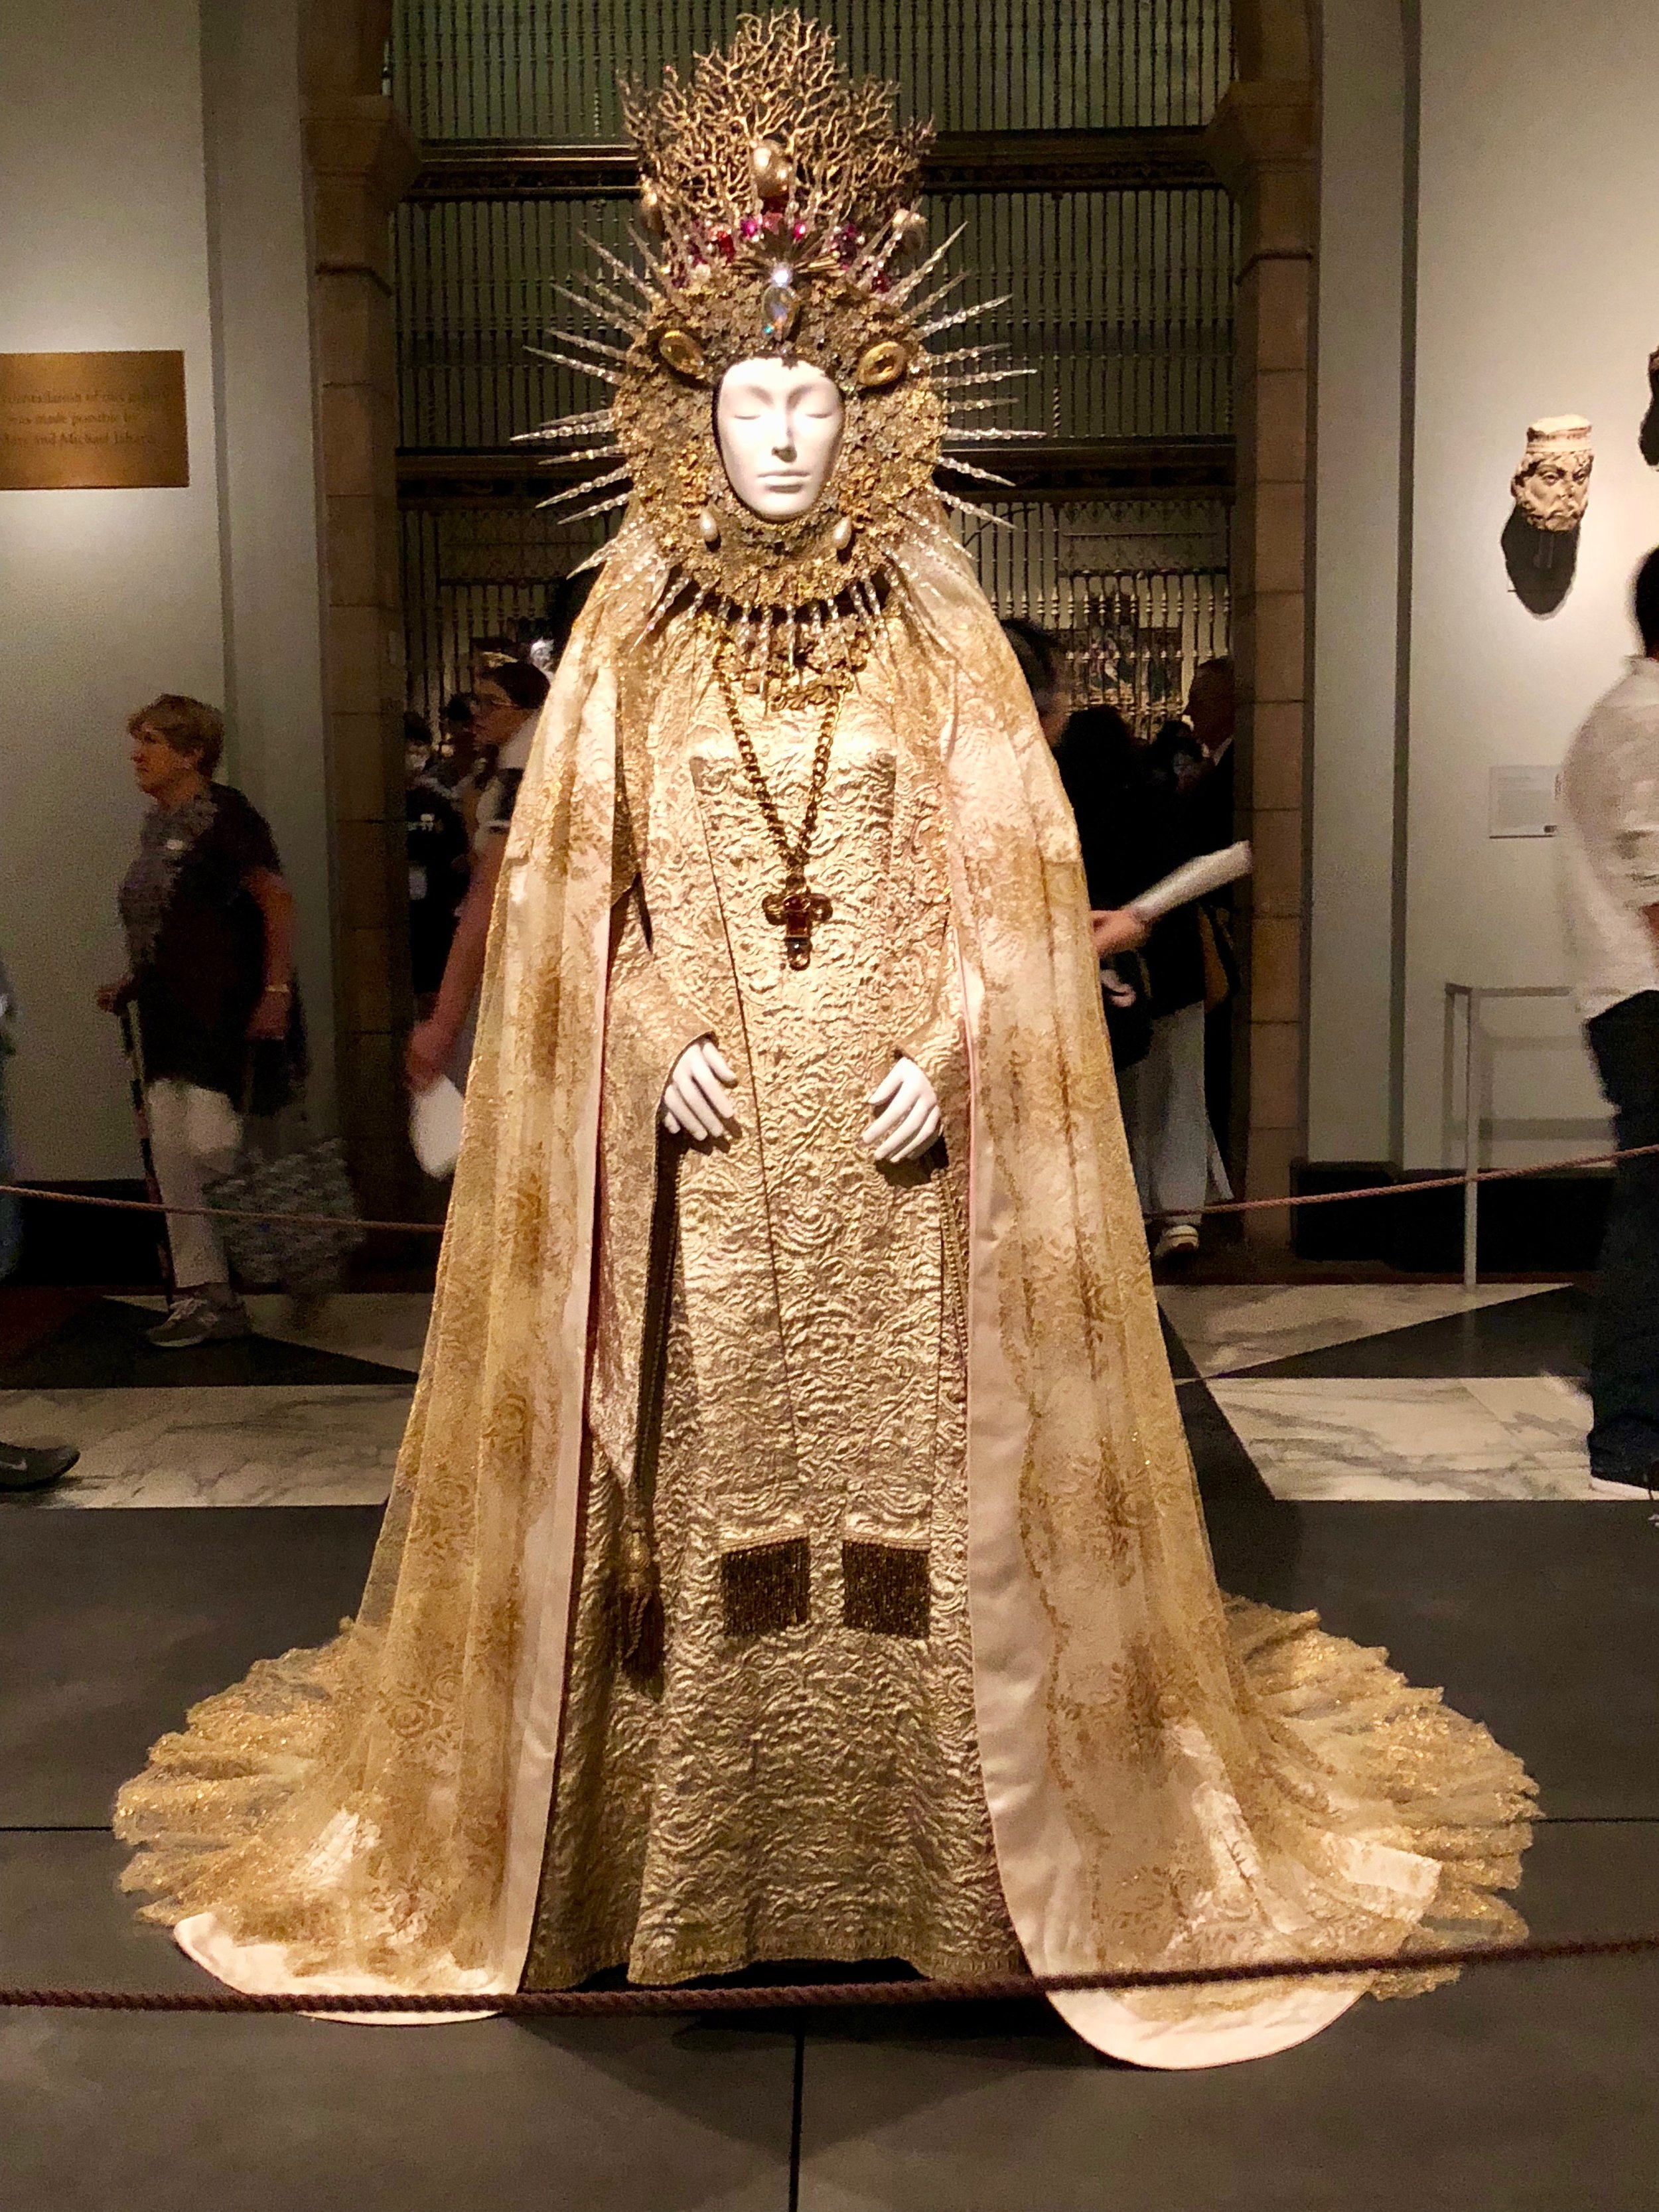 Yves Saint Laurent and Goossens, Statuary Vestment for the Virgin of El Rocio, 1985. Gold silk brocade with white and pink satin, gold silk and metal Chantilly lace, gold metal with polychrome crystals and pearls.